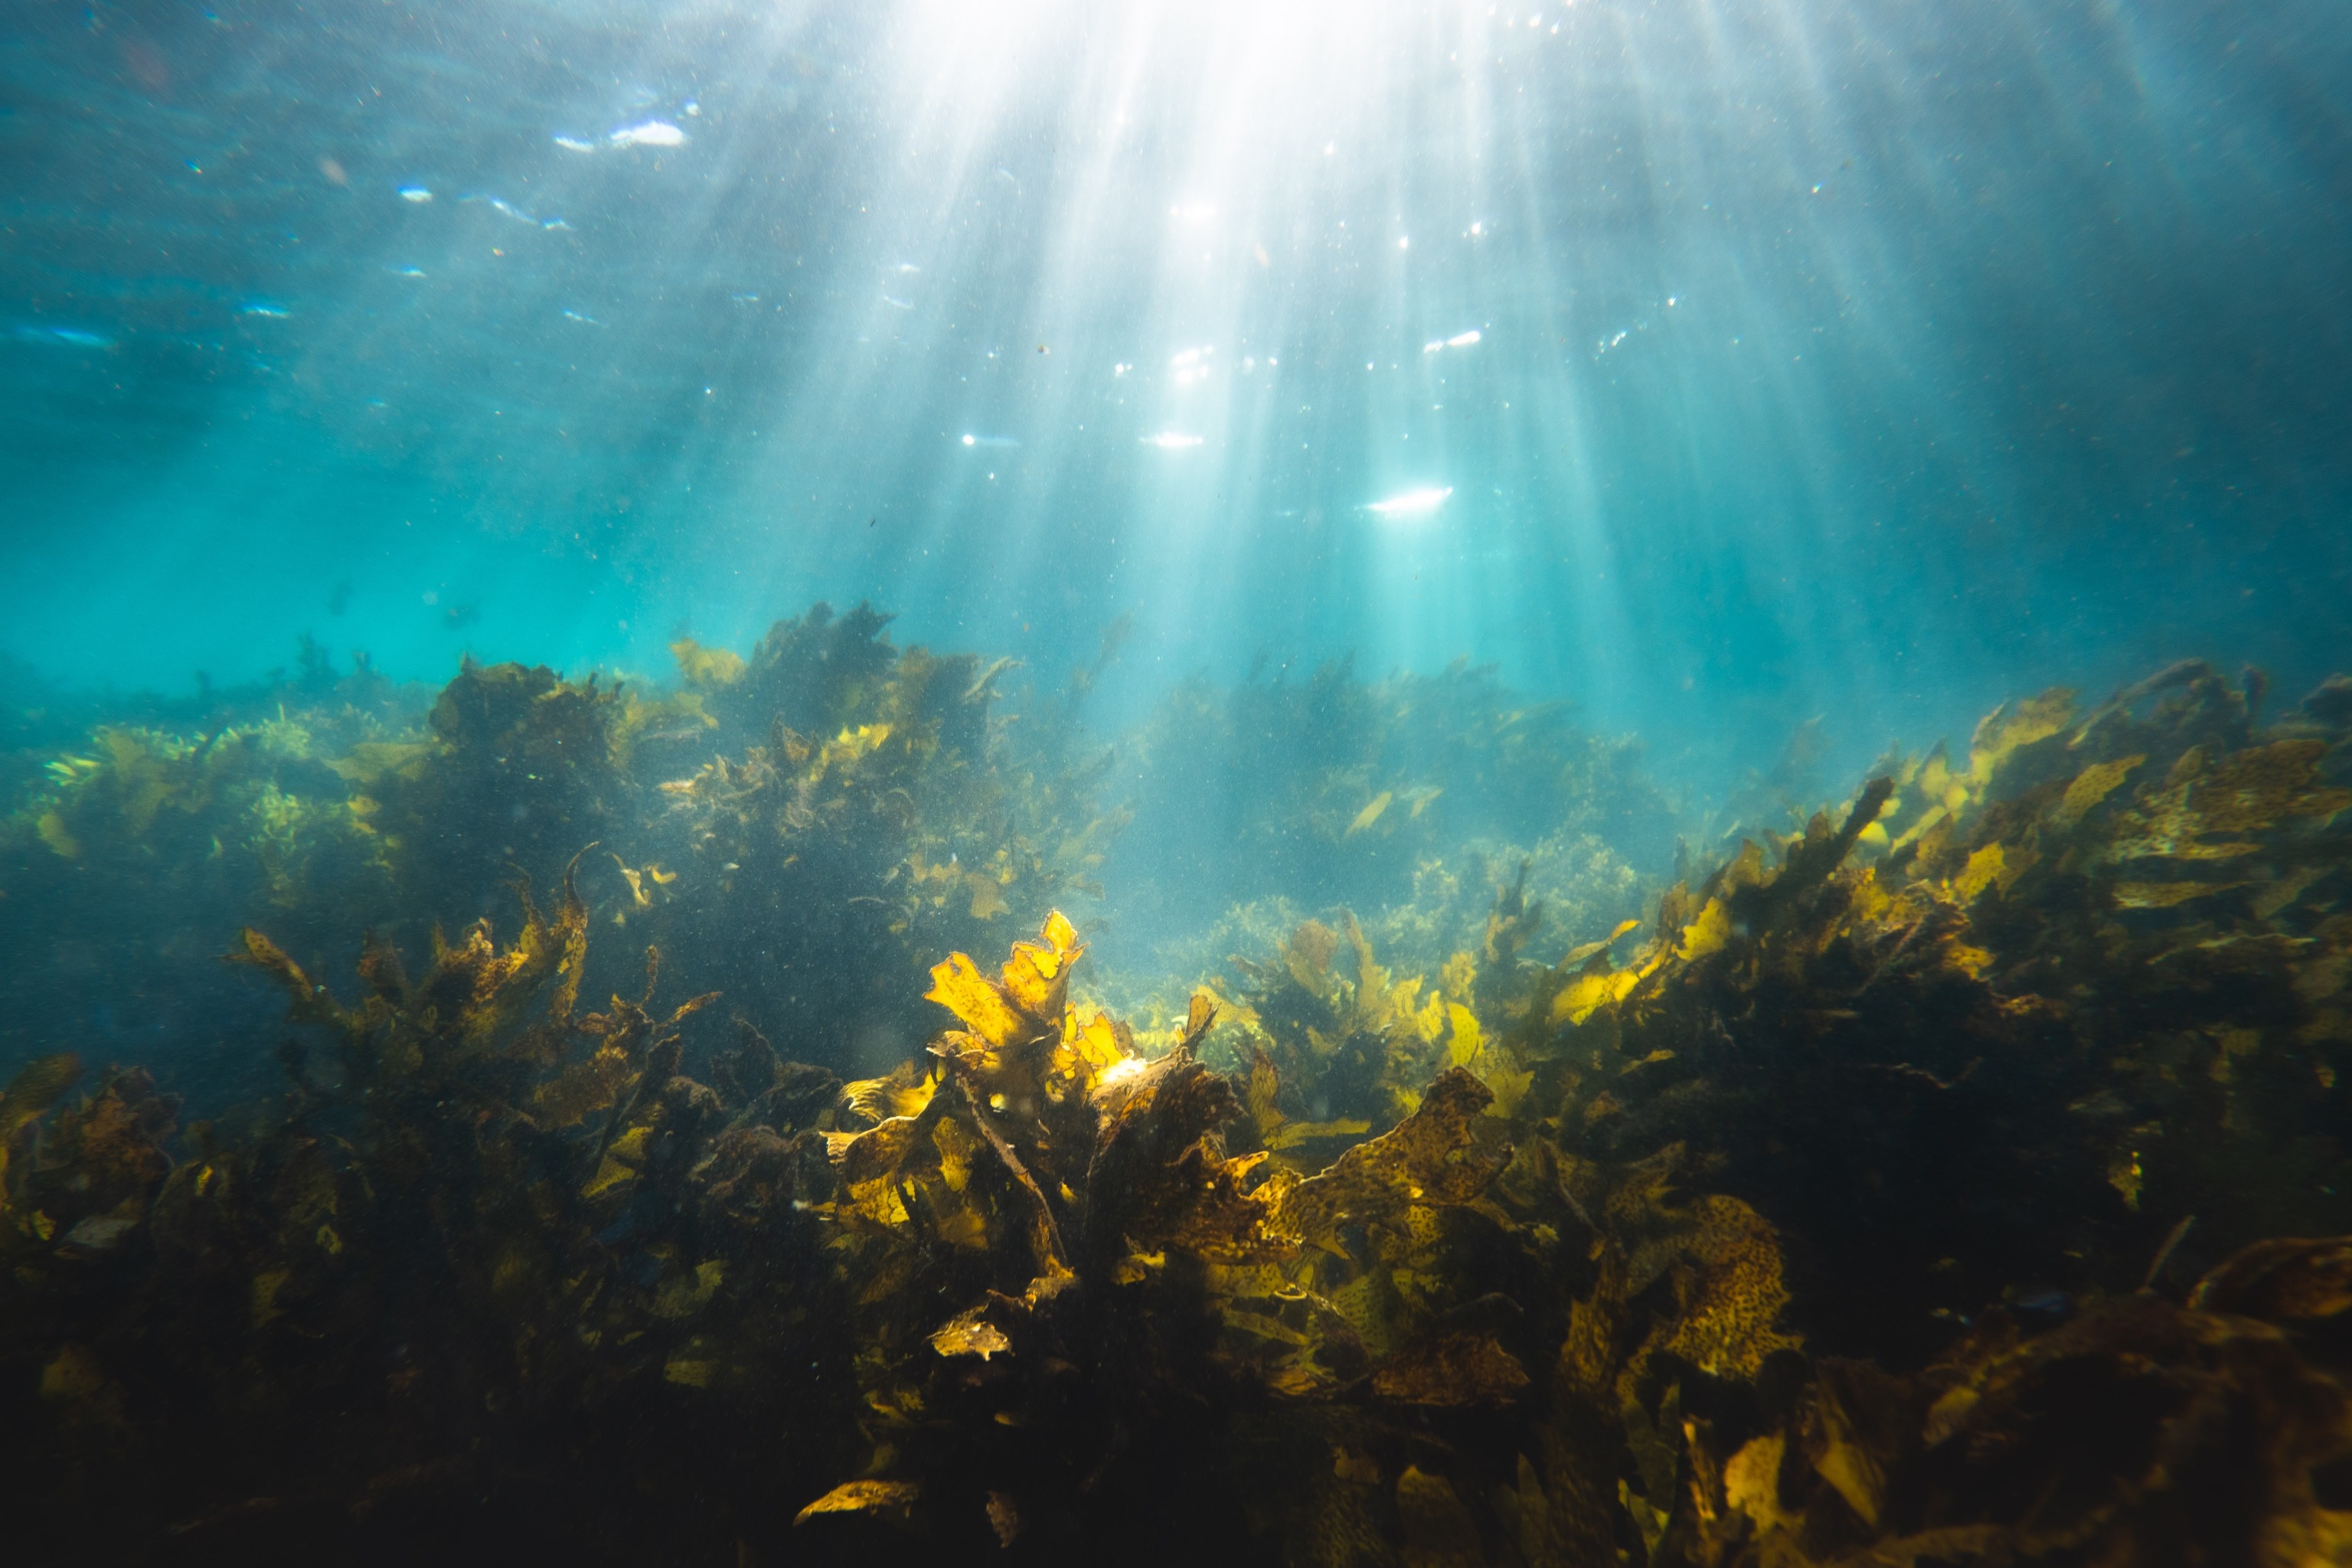 Protecting Marine Life in the Gulf of Mexico with Seaweed Farms